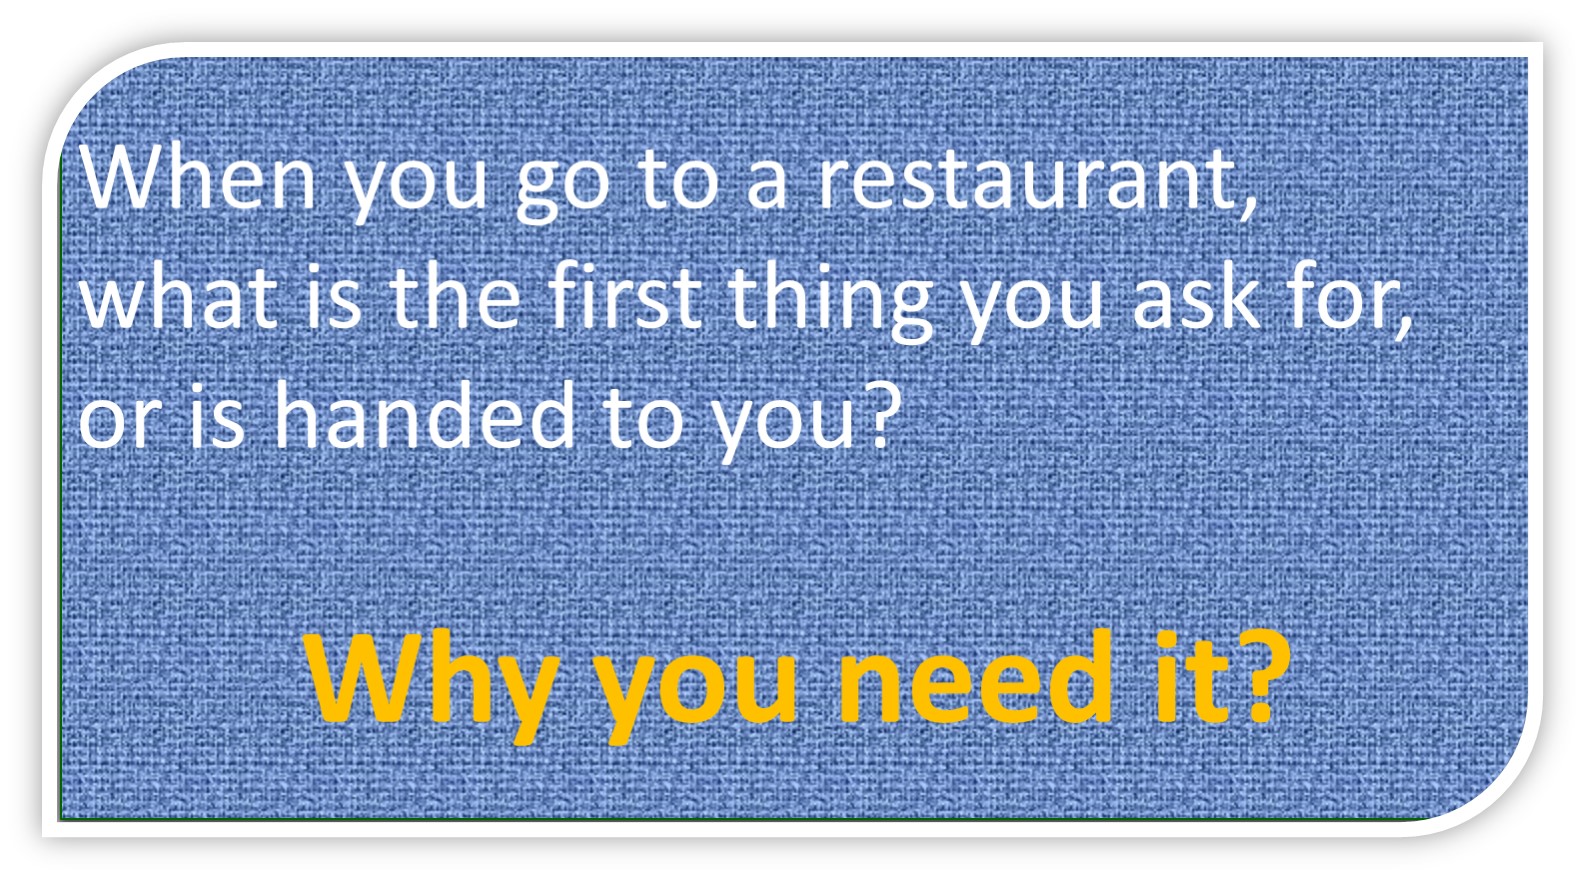 Would you go to a restaurant with one item on the menu?